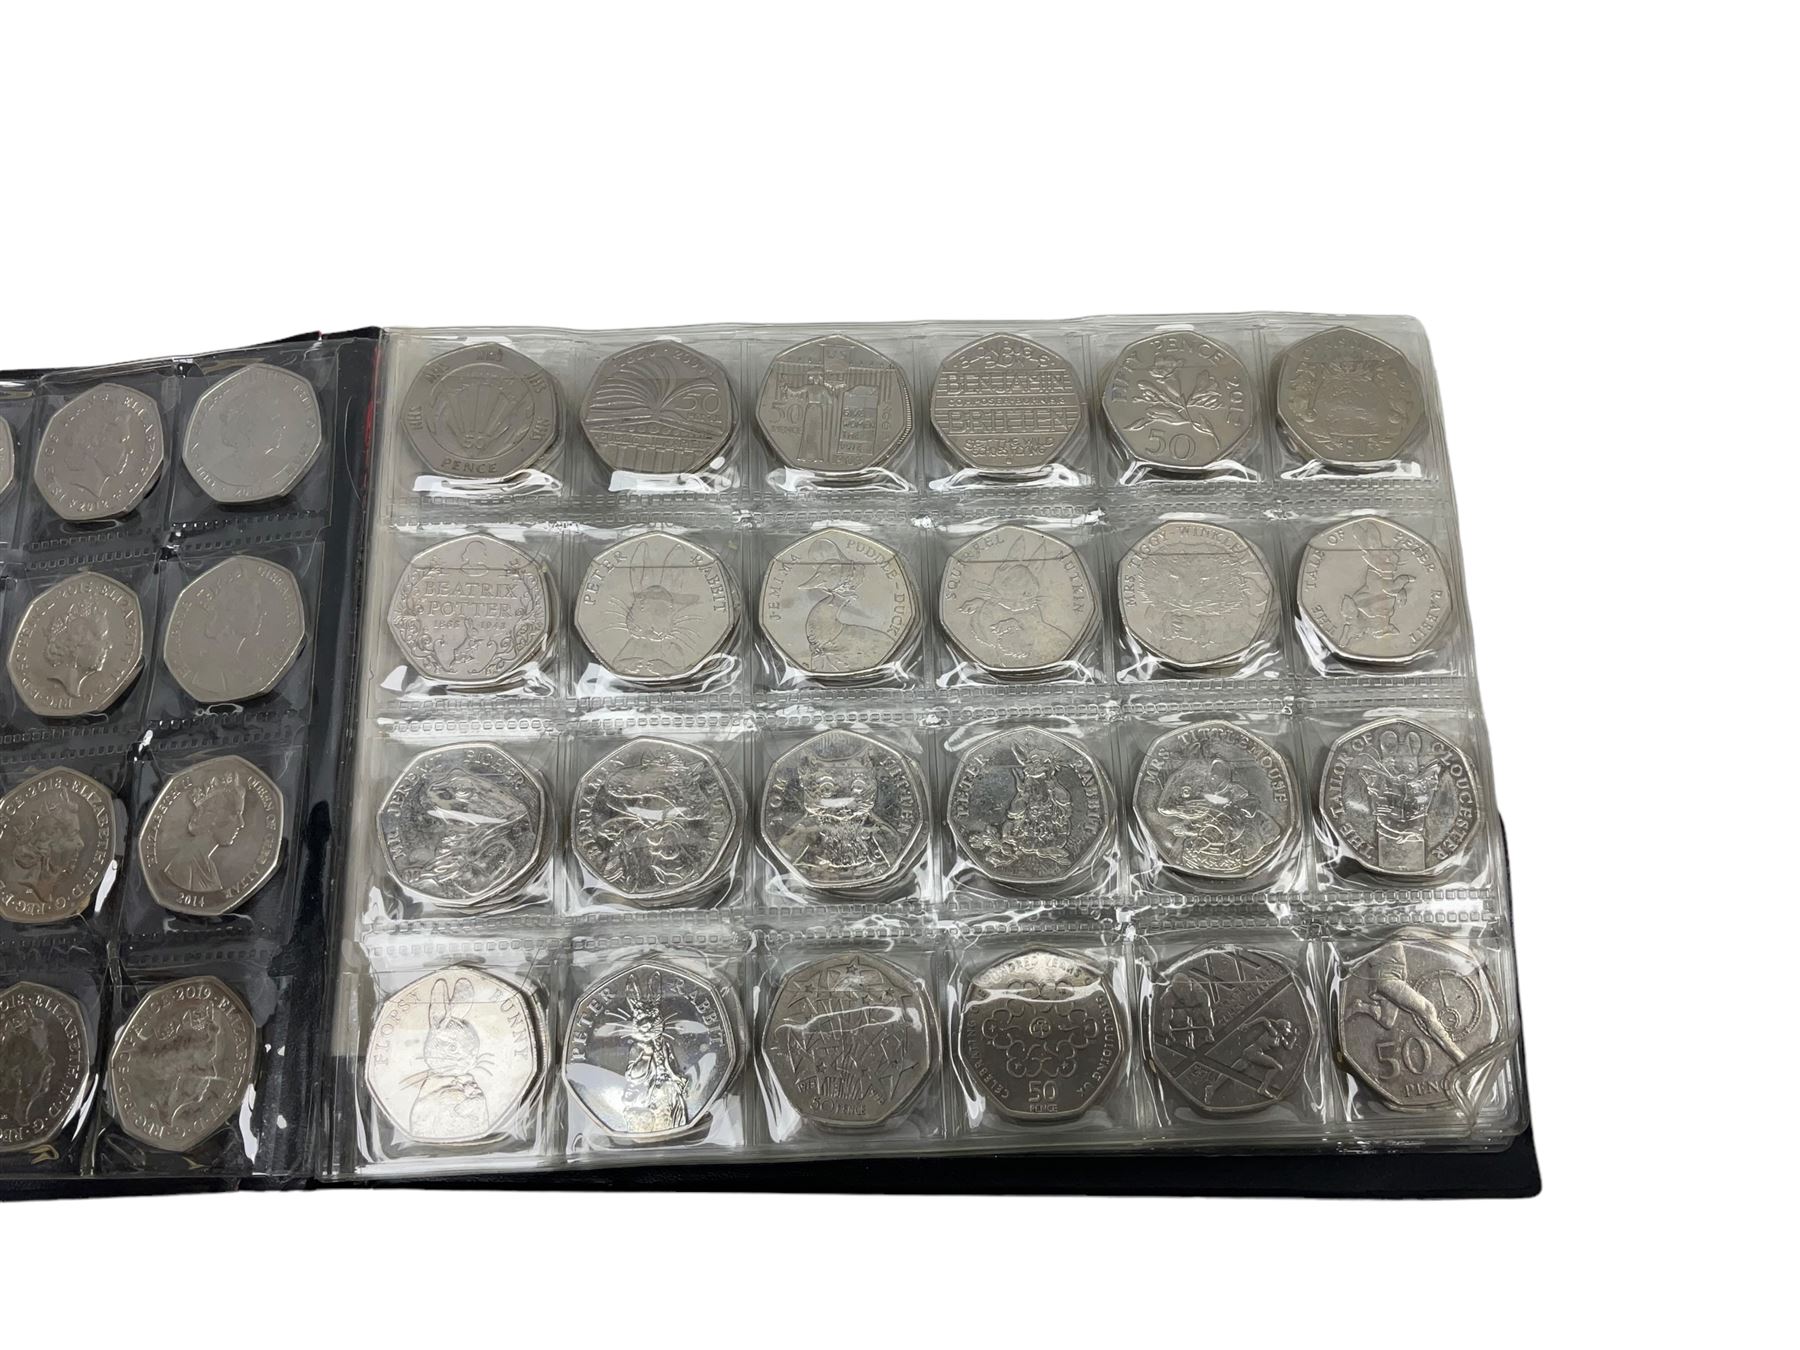 Mostly Great British Queen Elizabeth II commemorative coins from circulation